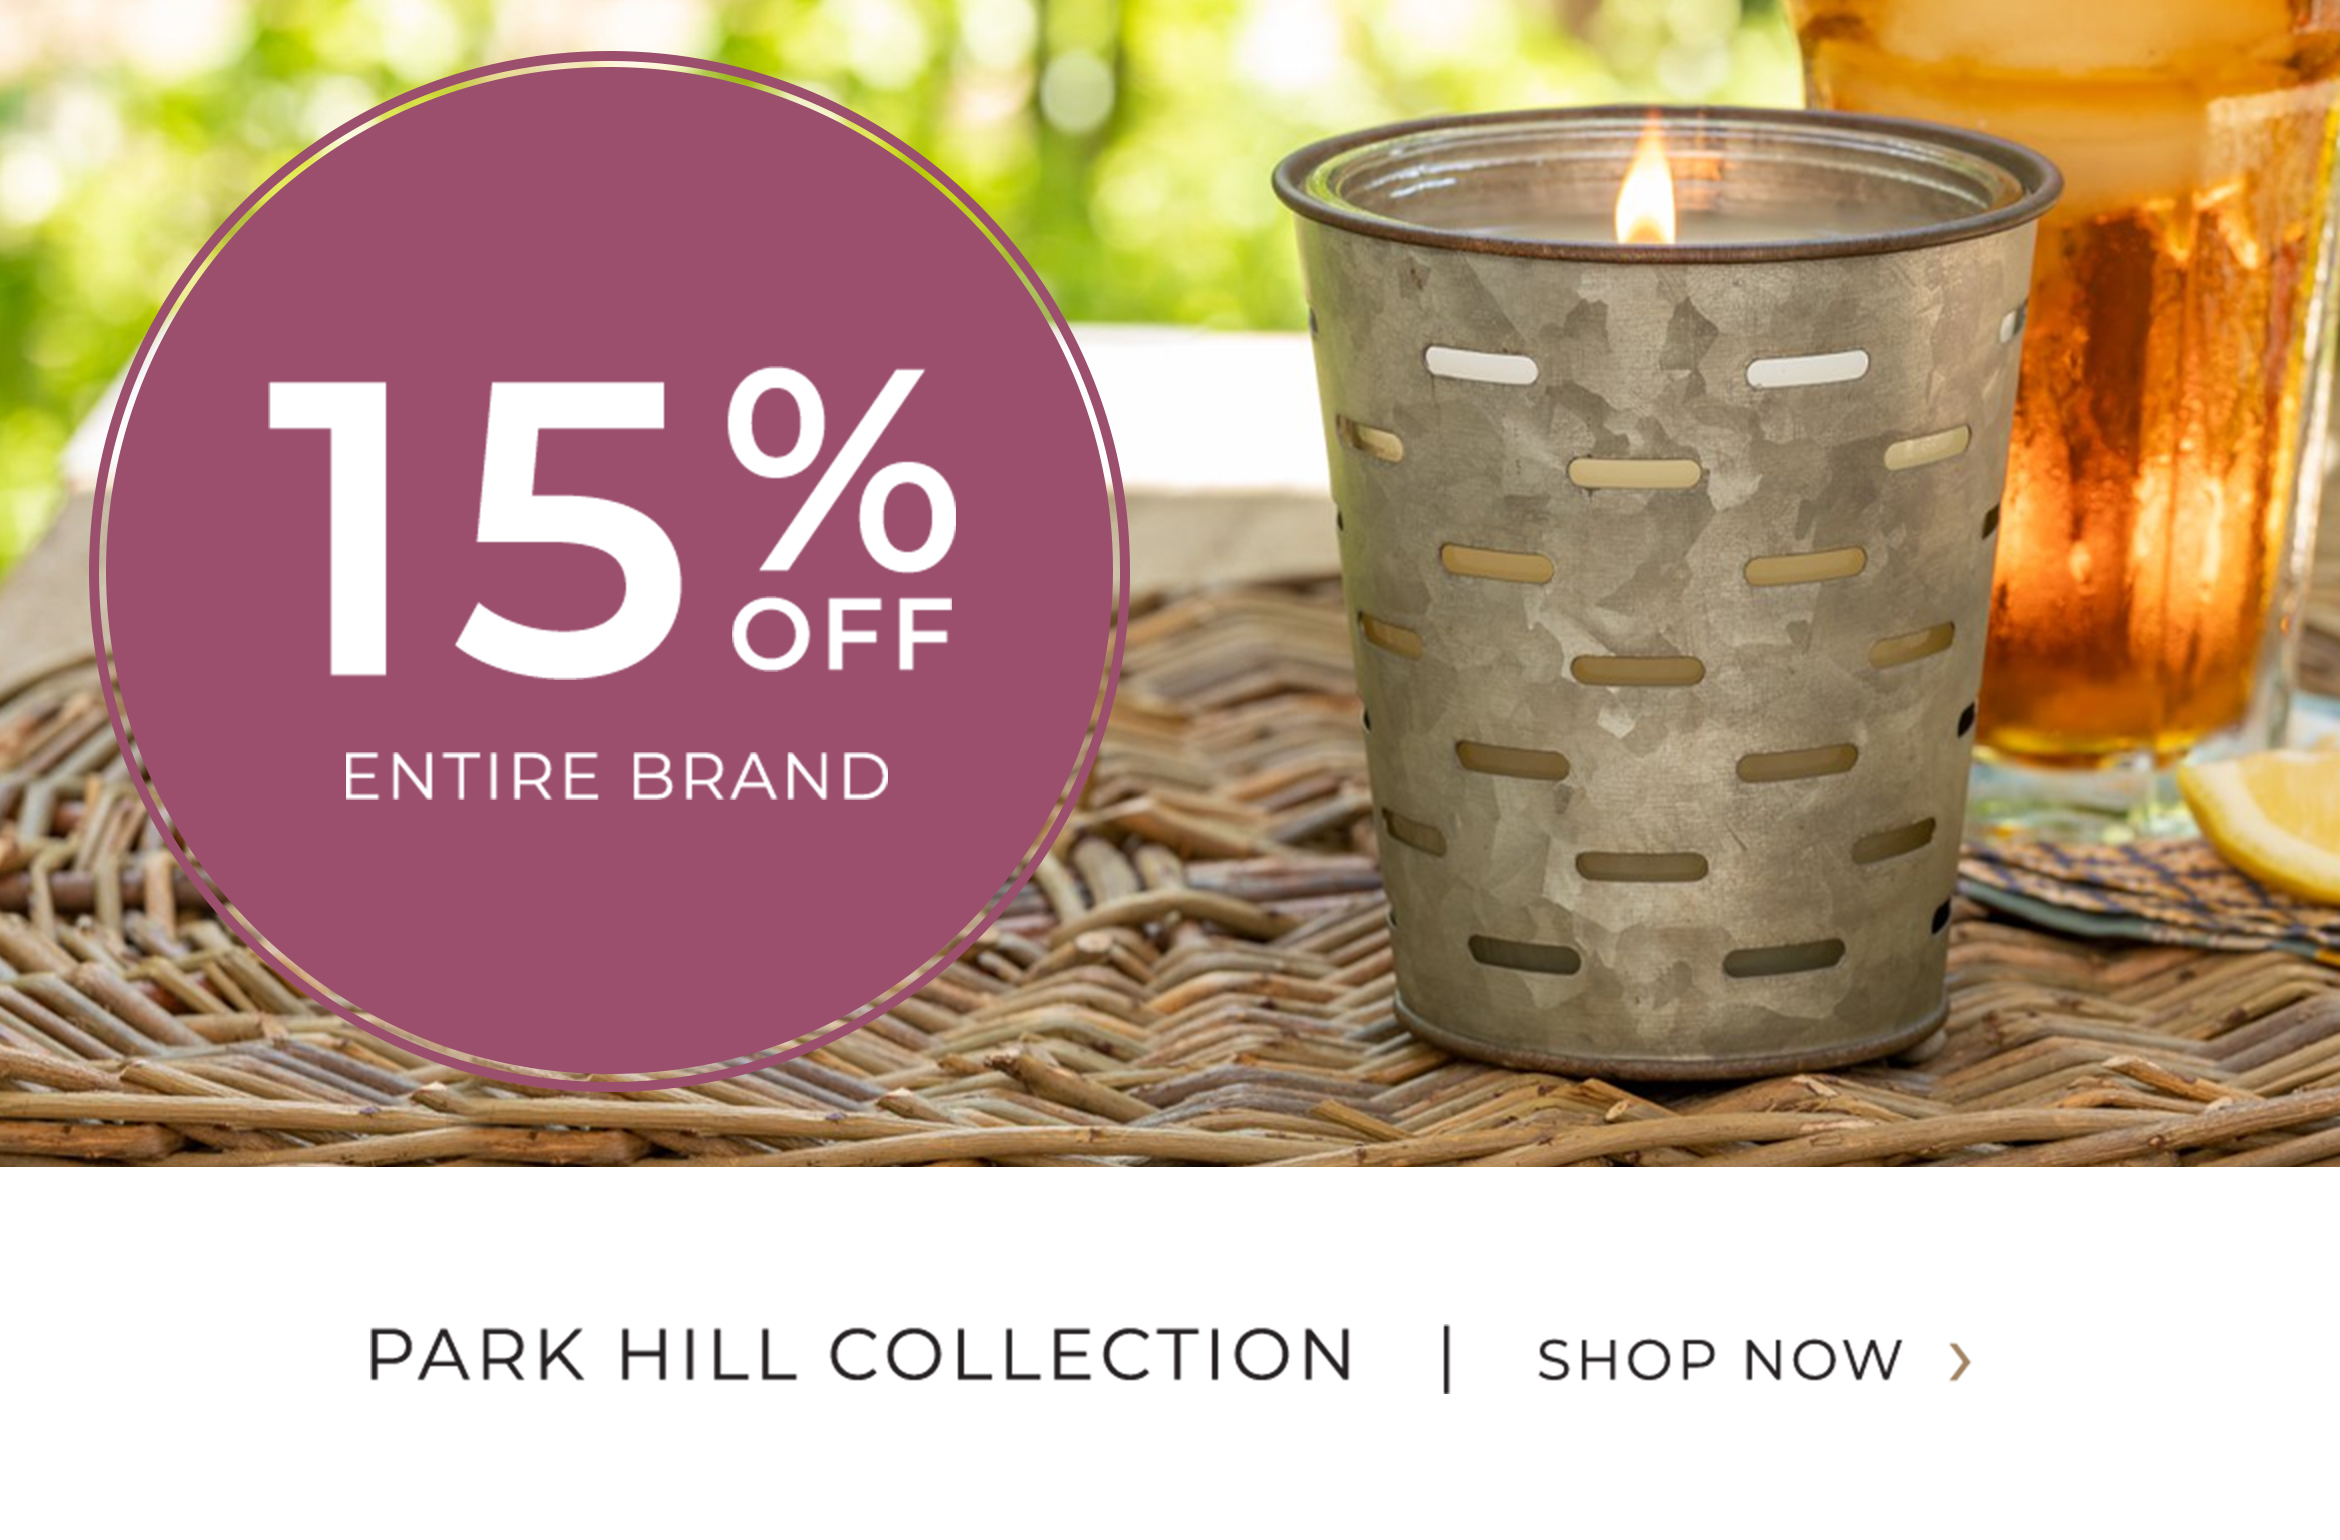 Park Hill Collection - 15 Percent OFF